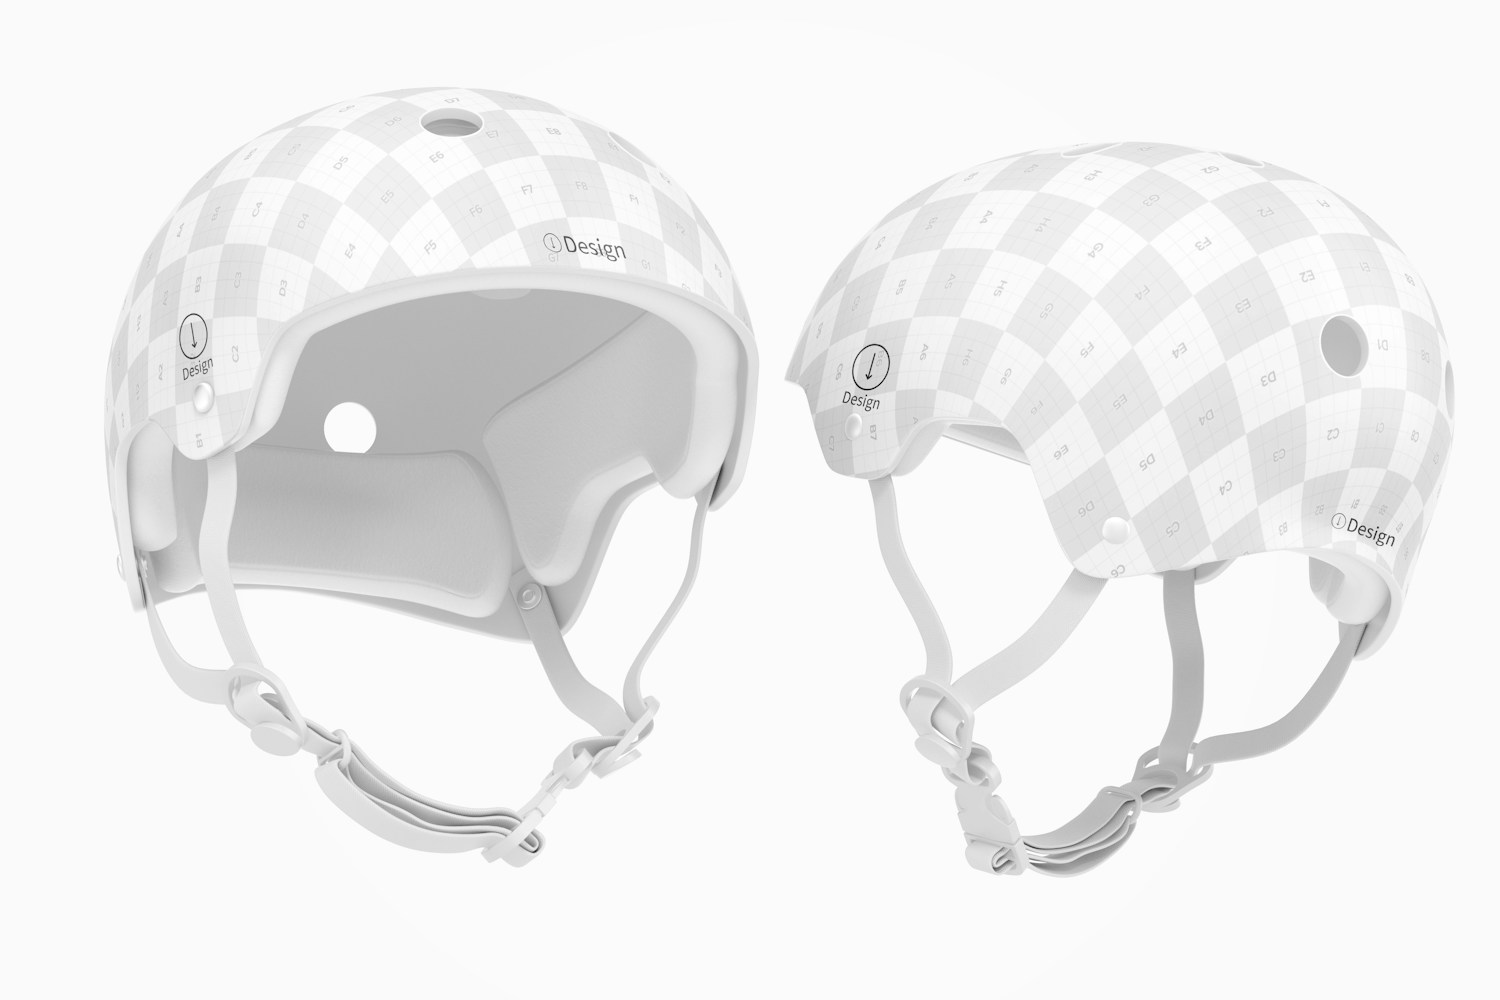 Skate Helmets Mockup, Front and Back View